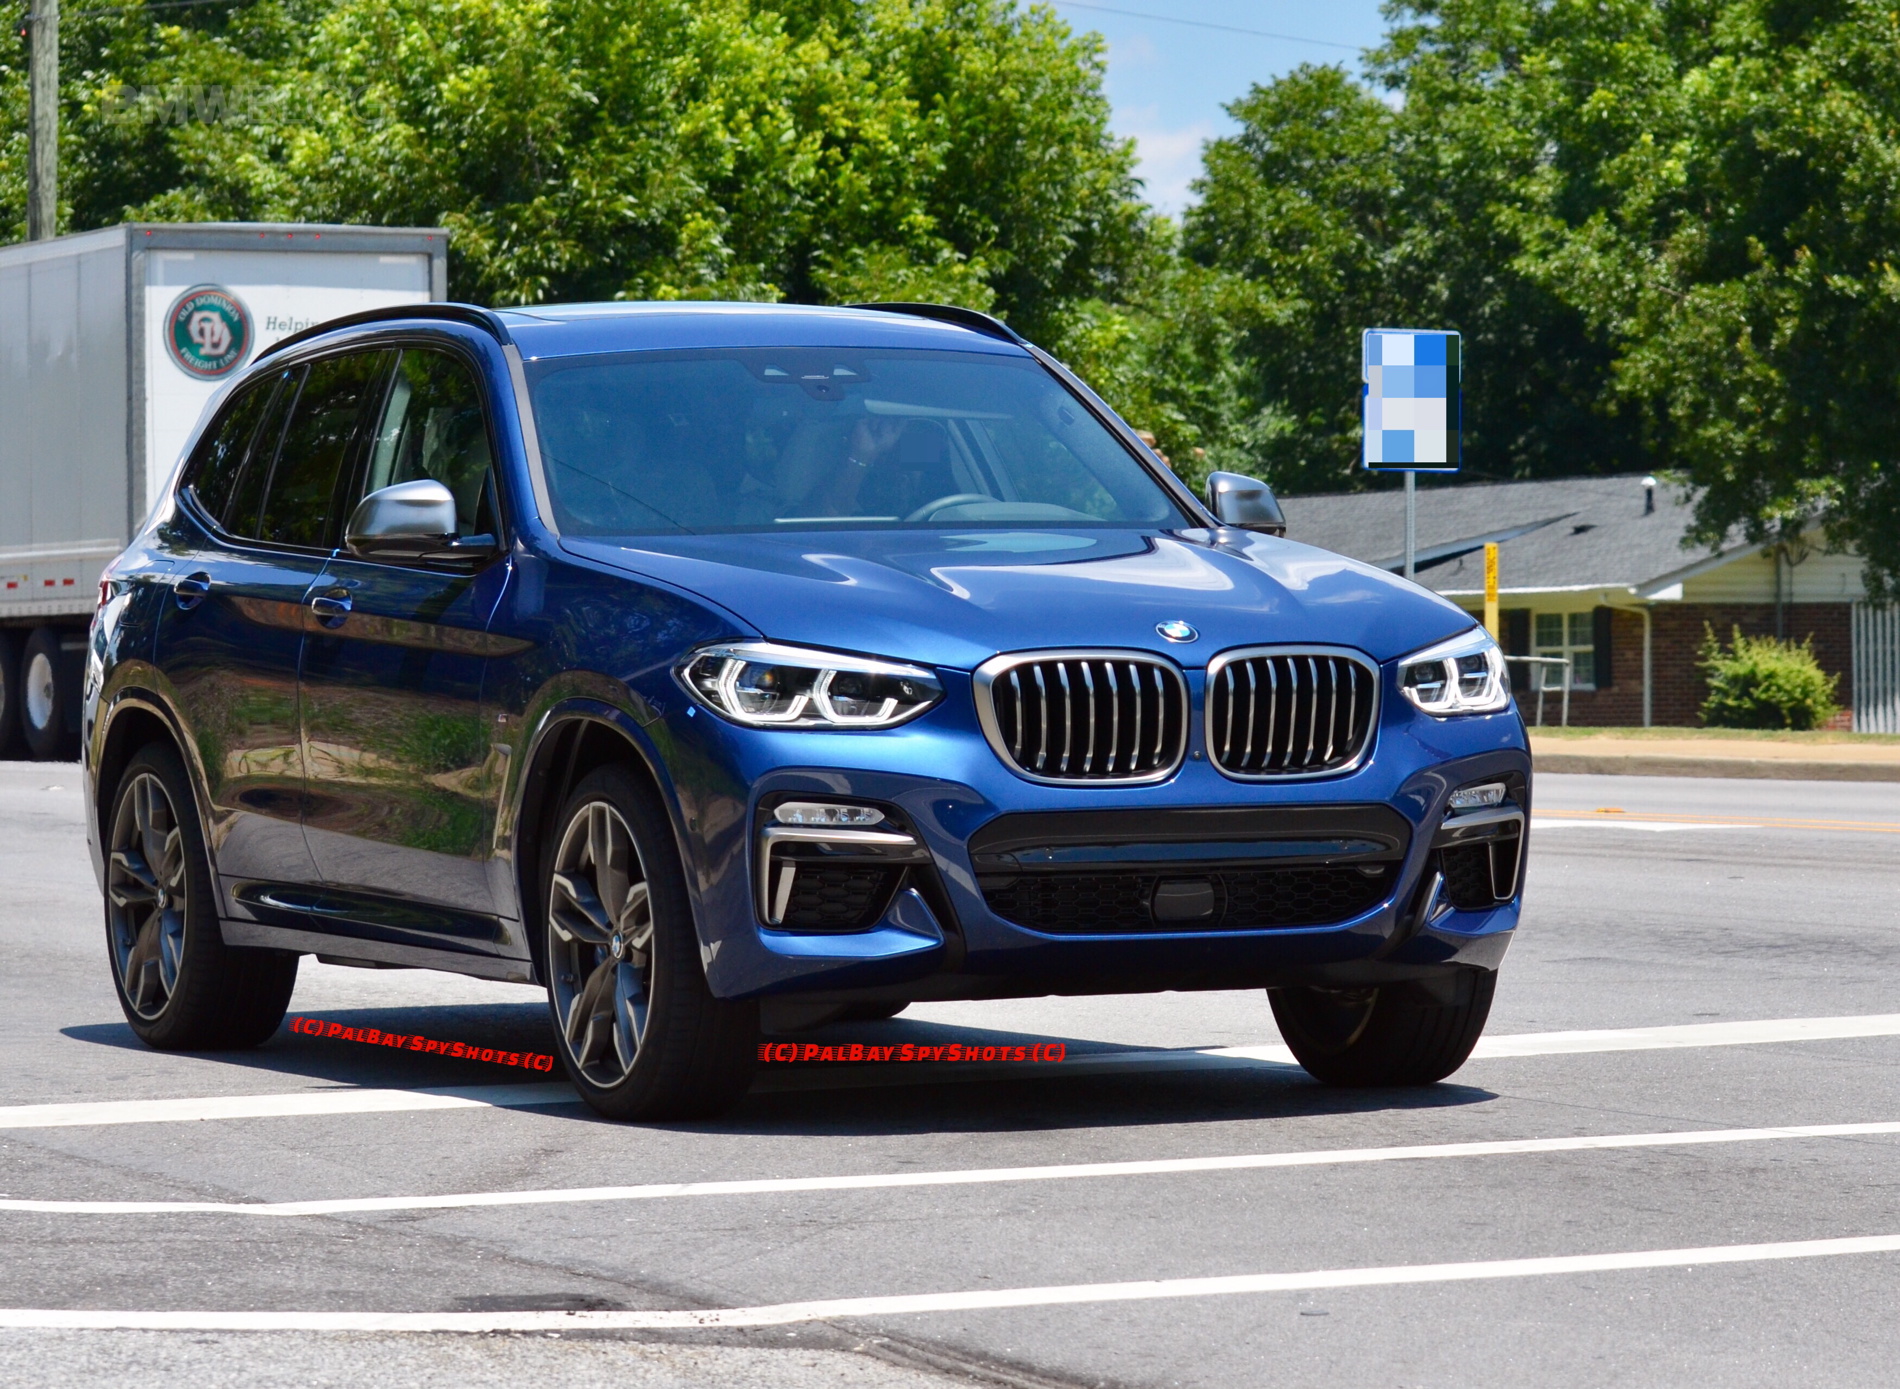 New BMW X3 M40i seen for the first time on the road | i NEW CARS